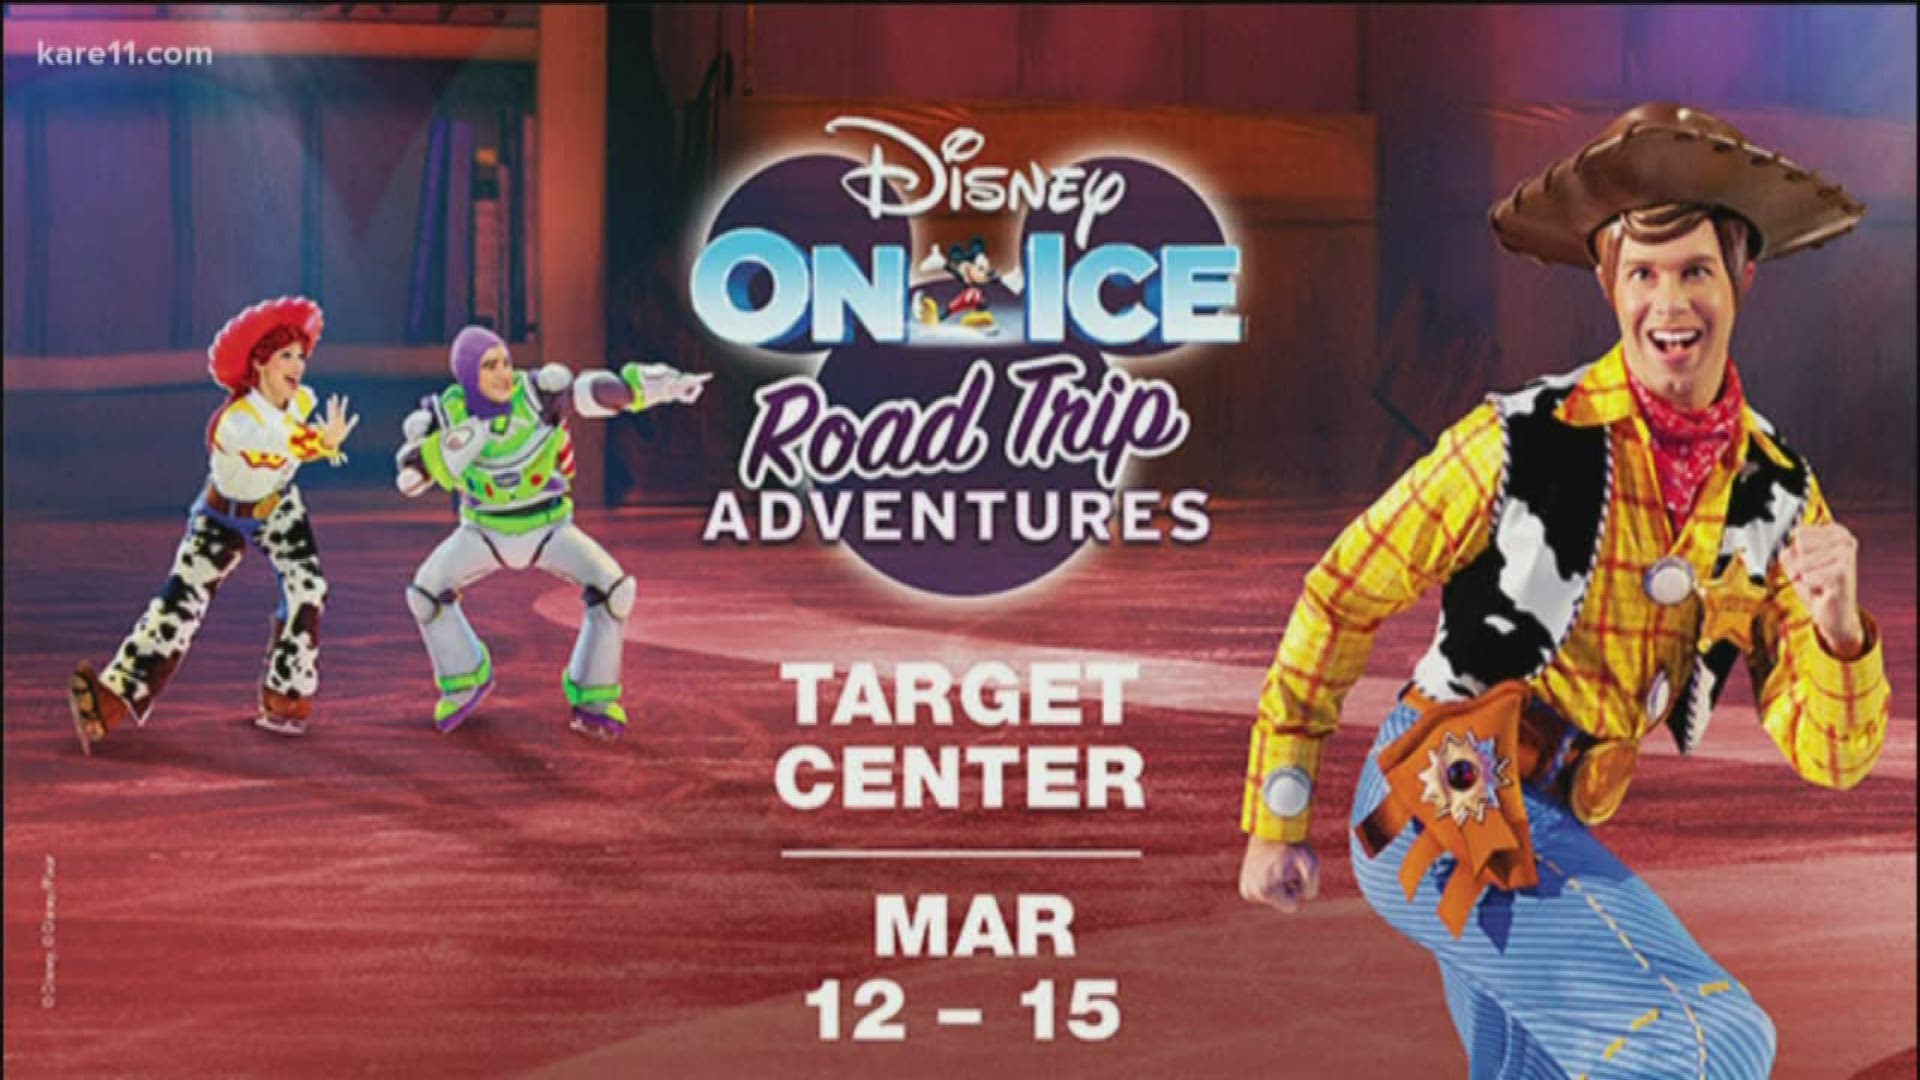 The show is coming to Target Center in Minneapolis for eight performances from March 12 to 15.